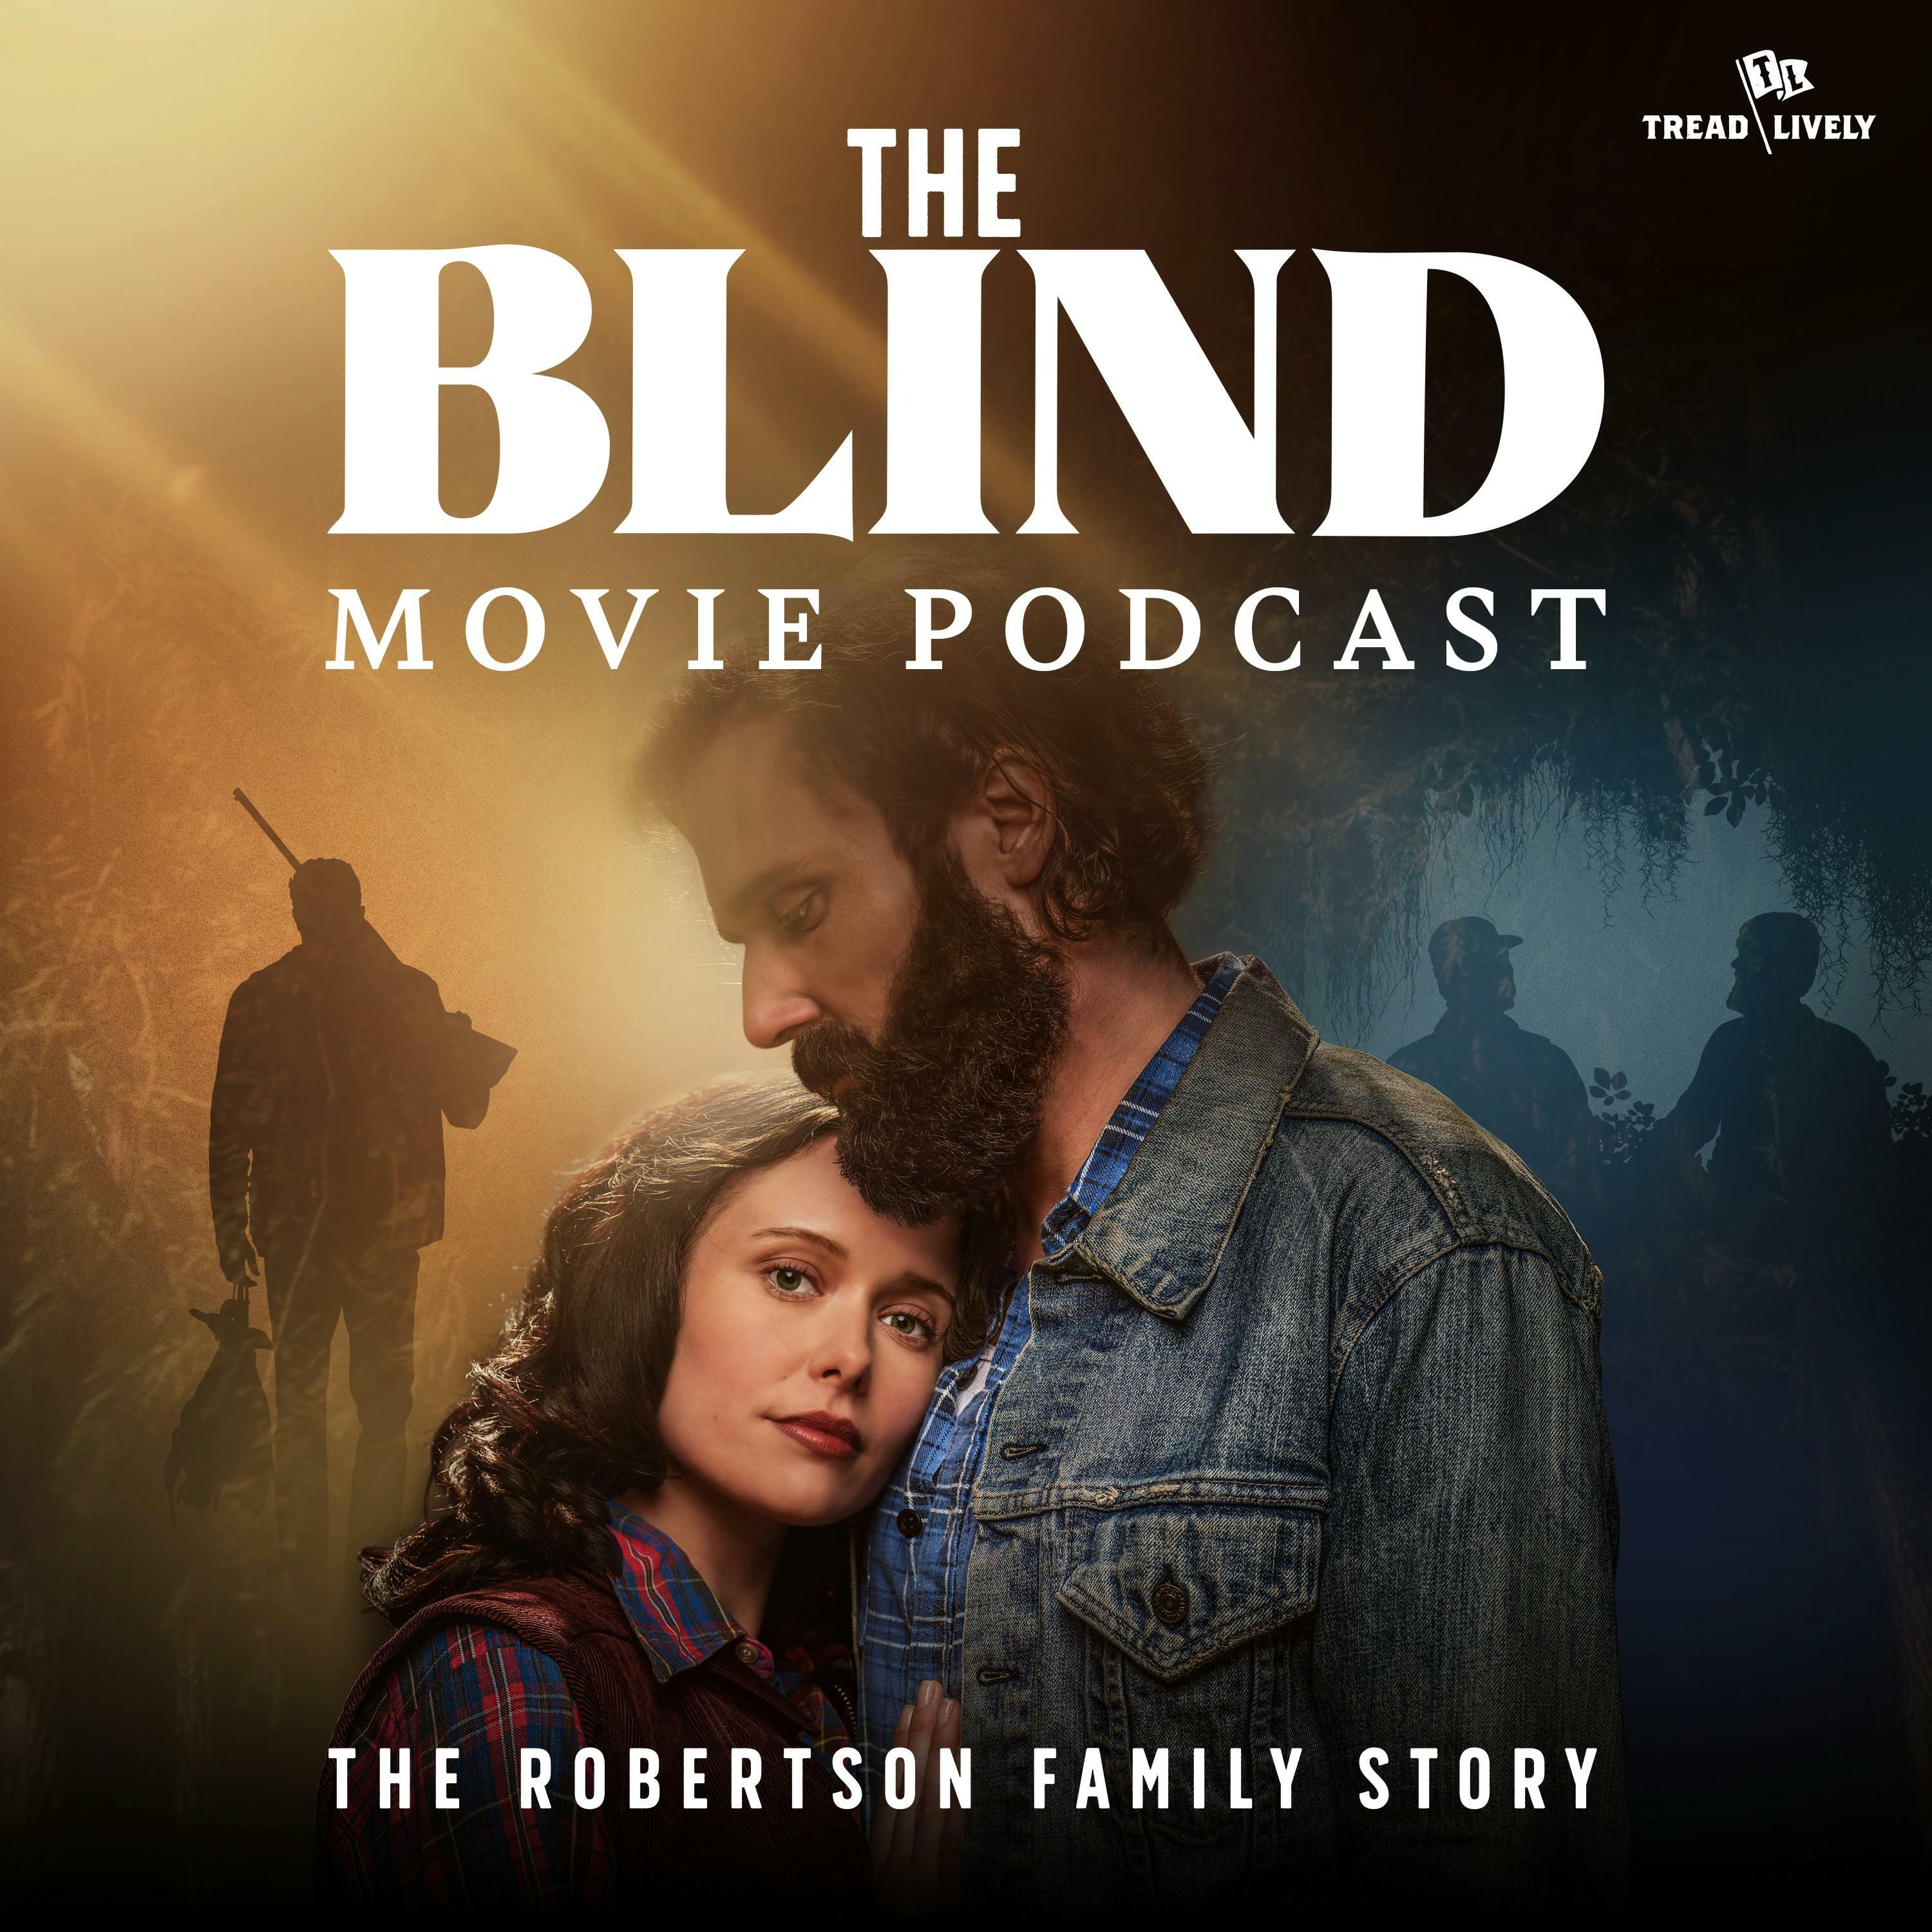 The Blind Movie Podcast The Robertson Family Story iHeart